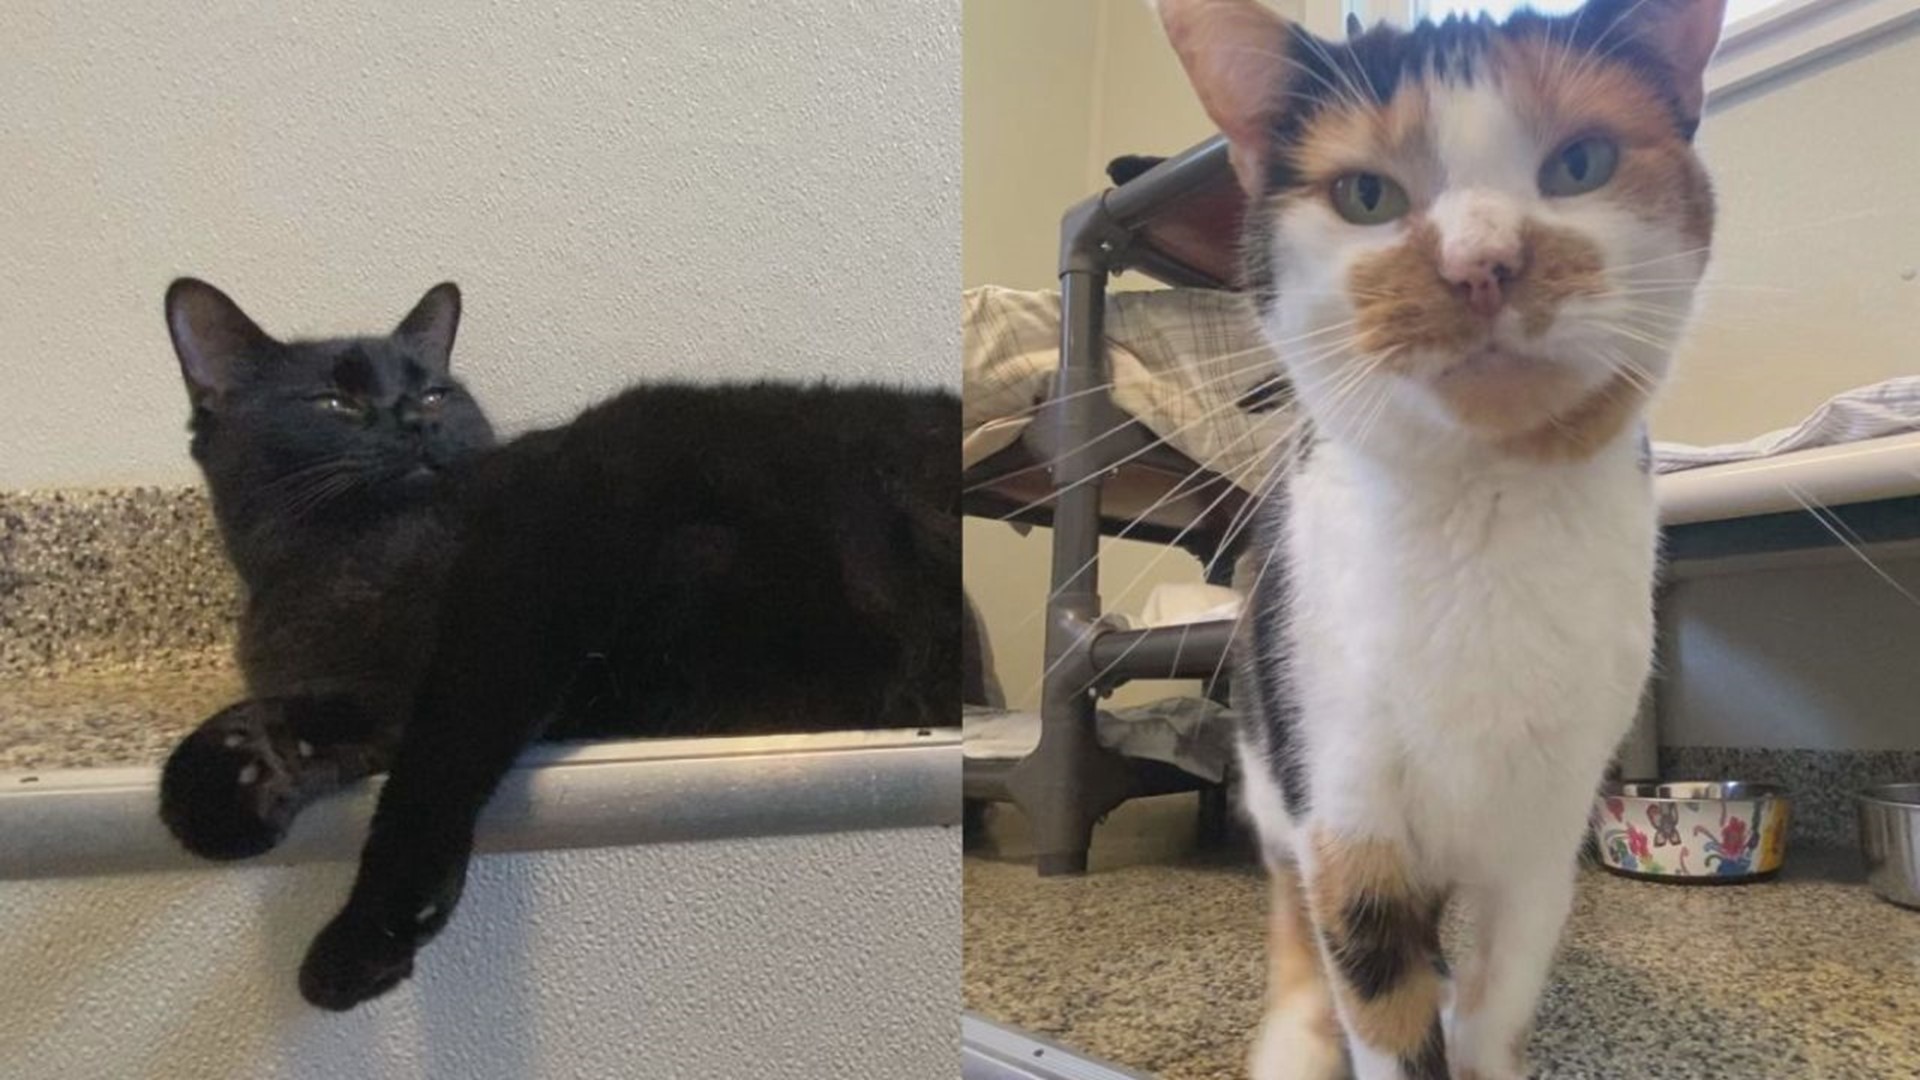 Onyx and Marie are both looking for their new families at Animal Rescue Inc. in New Freedom, York County.